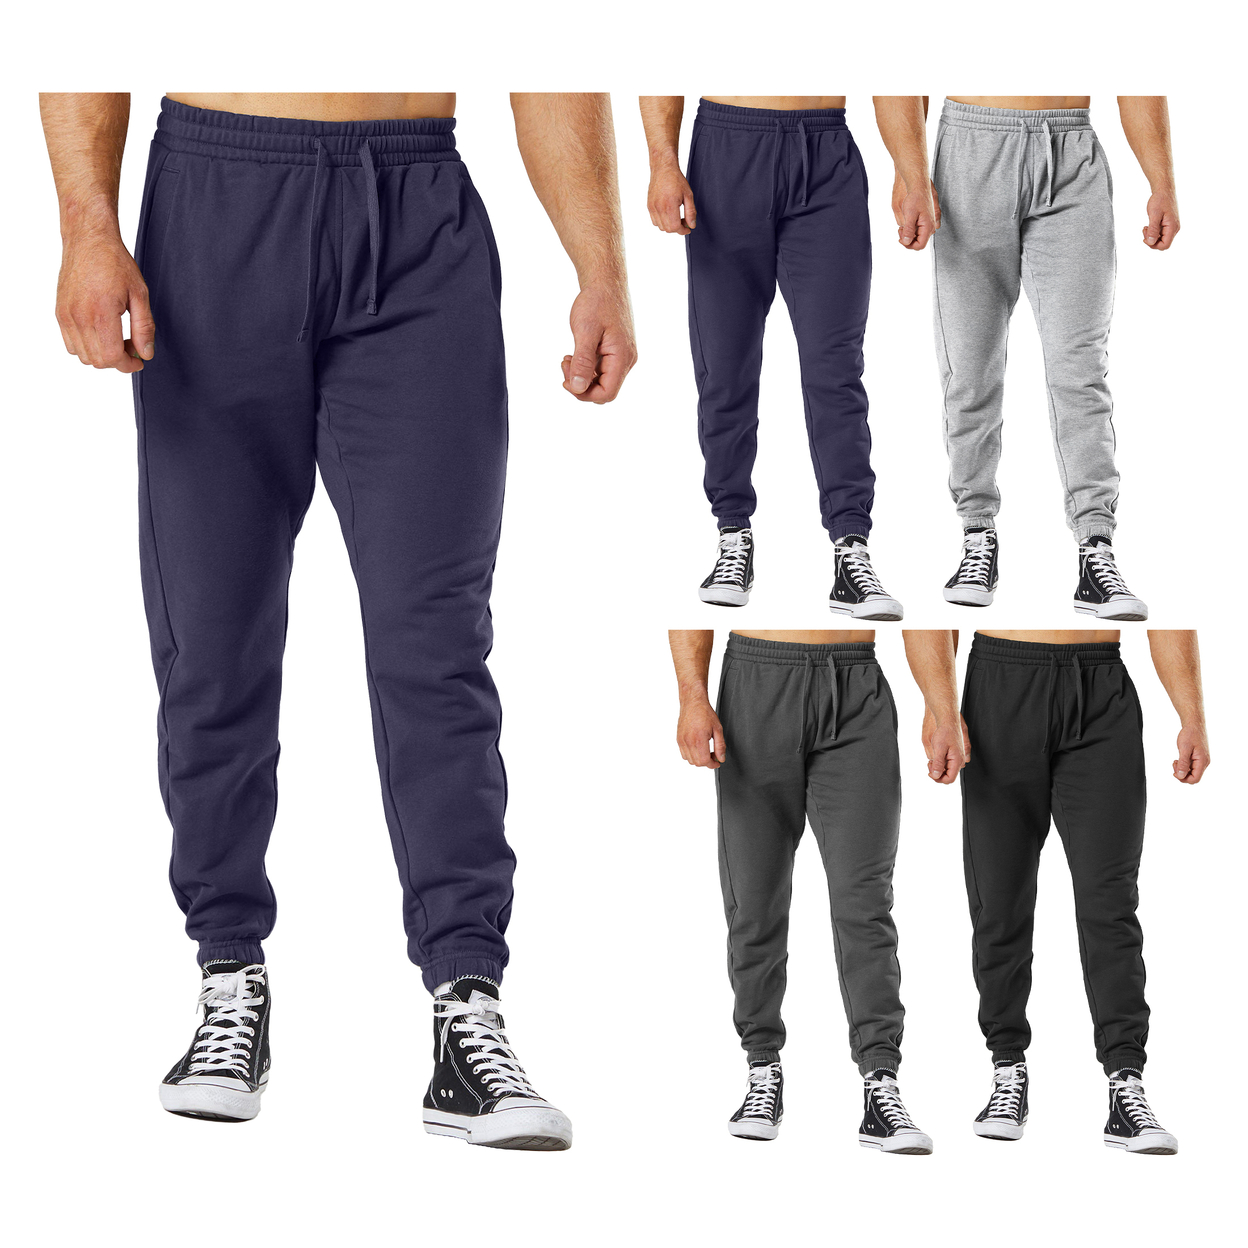 Multi-Pack: Men's Ultra-Soft Cozy Winter Warm Casual Fleece-Lined Sweatpants Jogger - 3-pack, Small